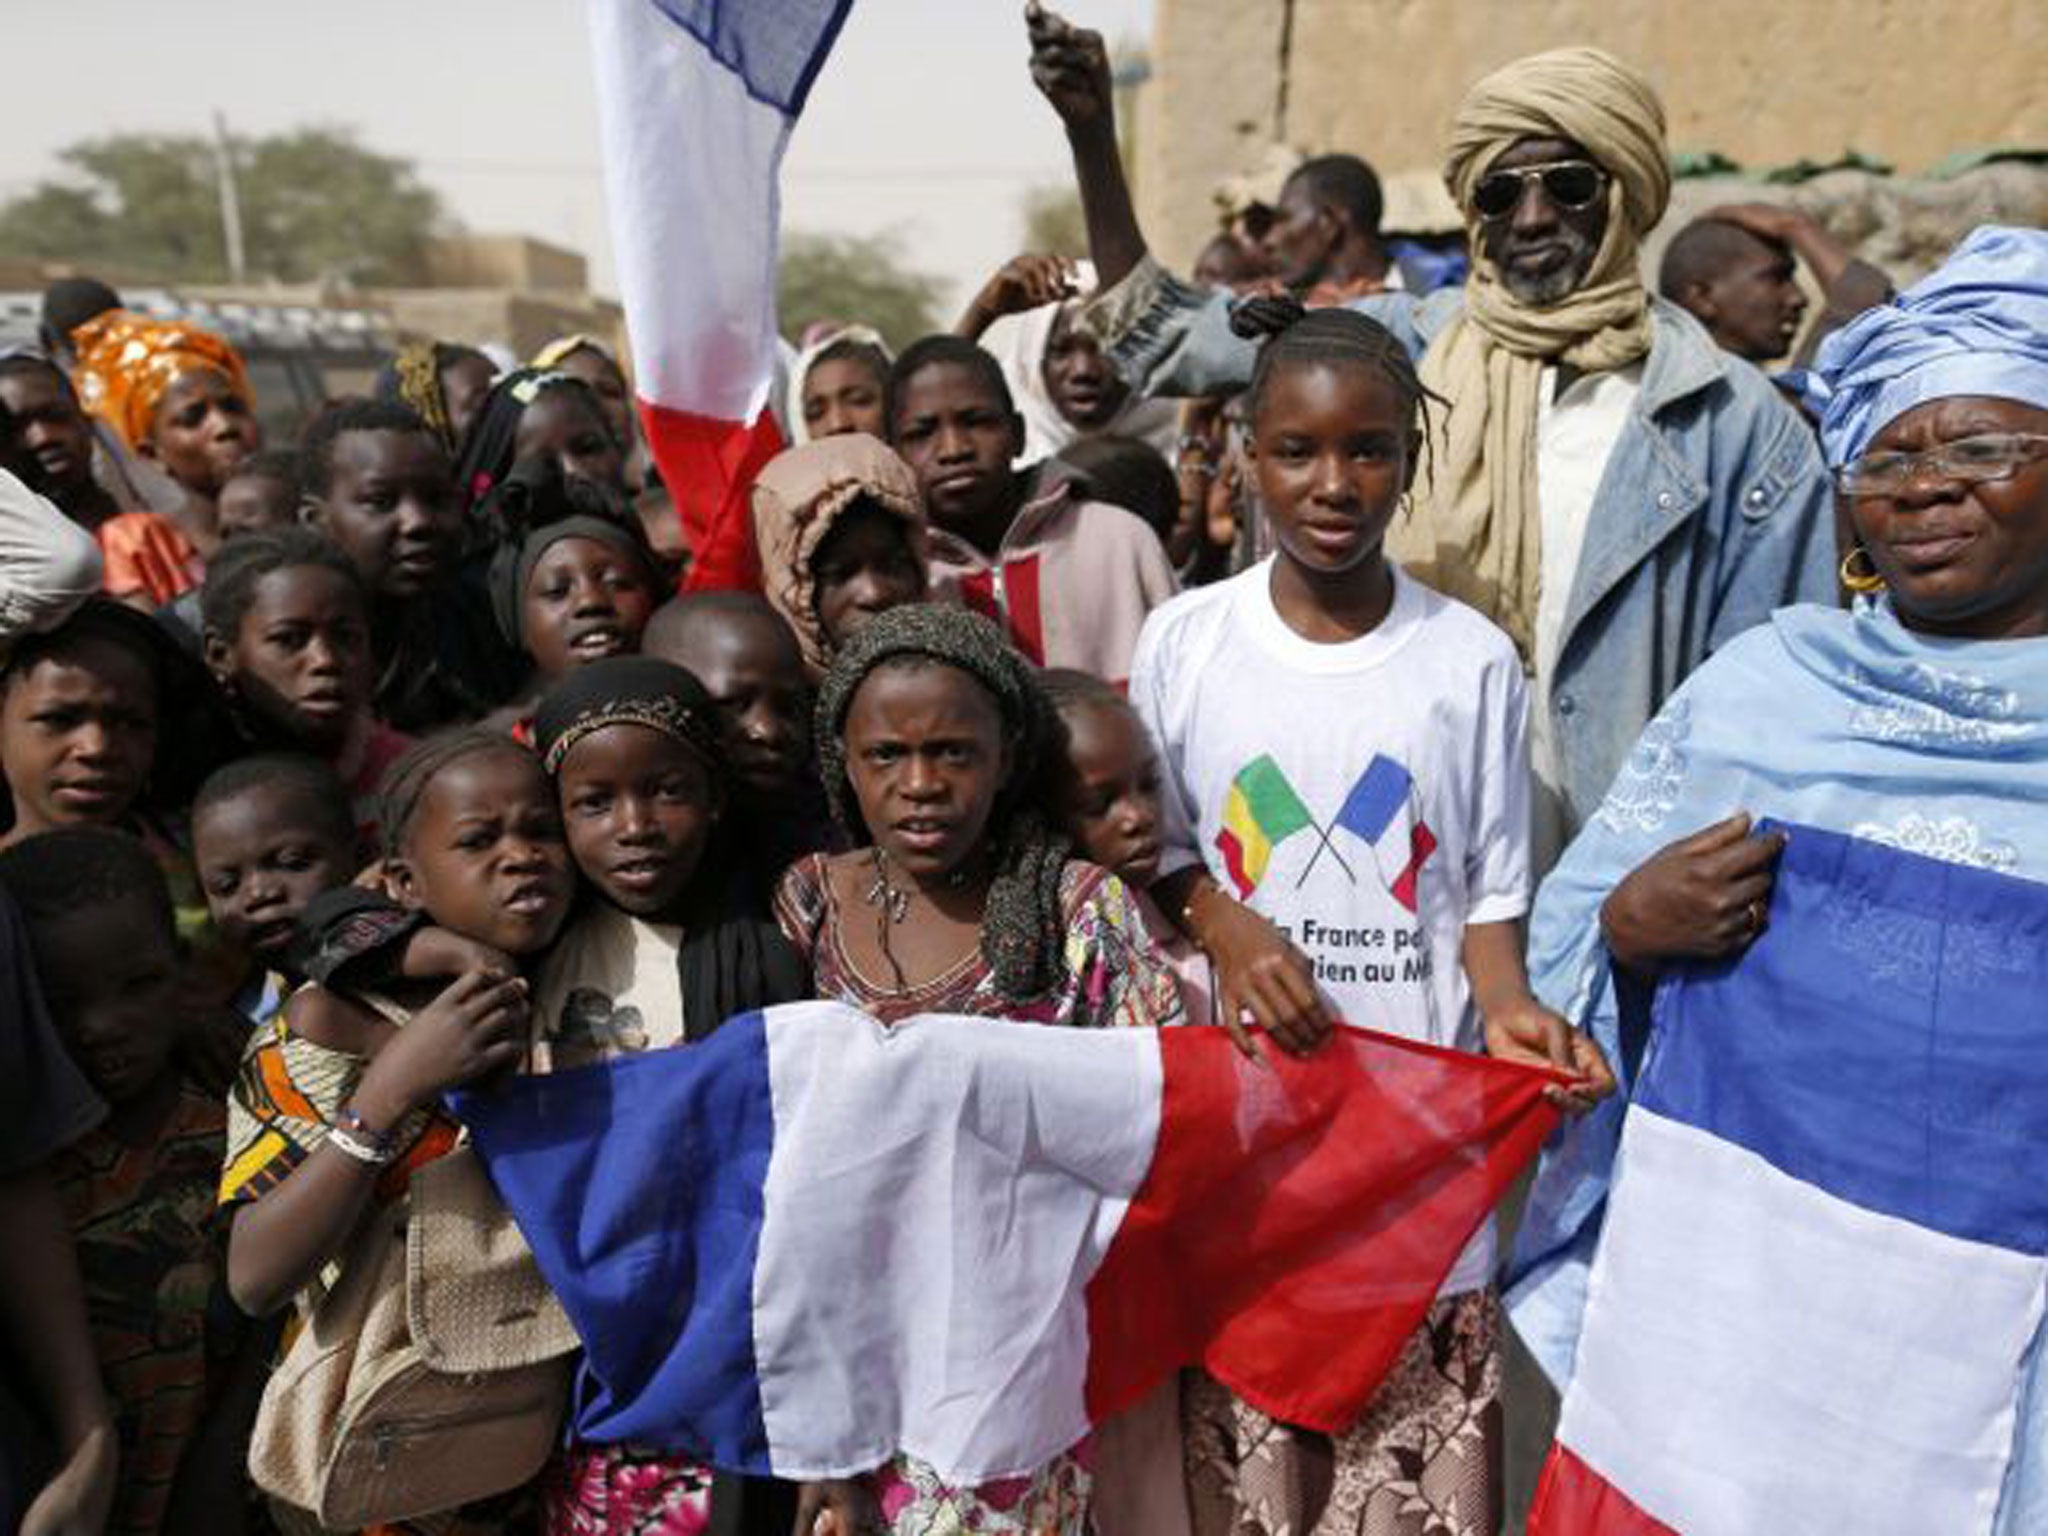 As celebrations continue after the liberation of Timbuktu and French President François Hollande prepares to fly into Mali, French troops with a core of special forces are hunting Adama and his fellow leaders in the deserts and mountains of Mali